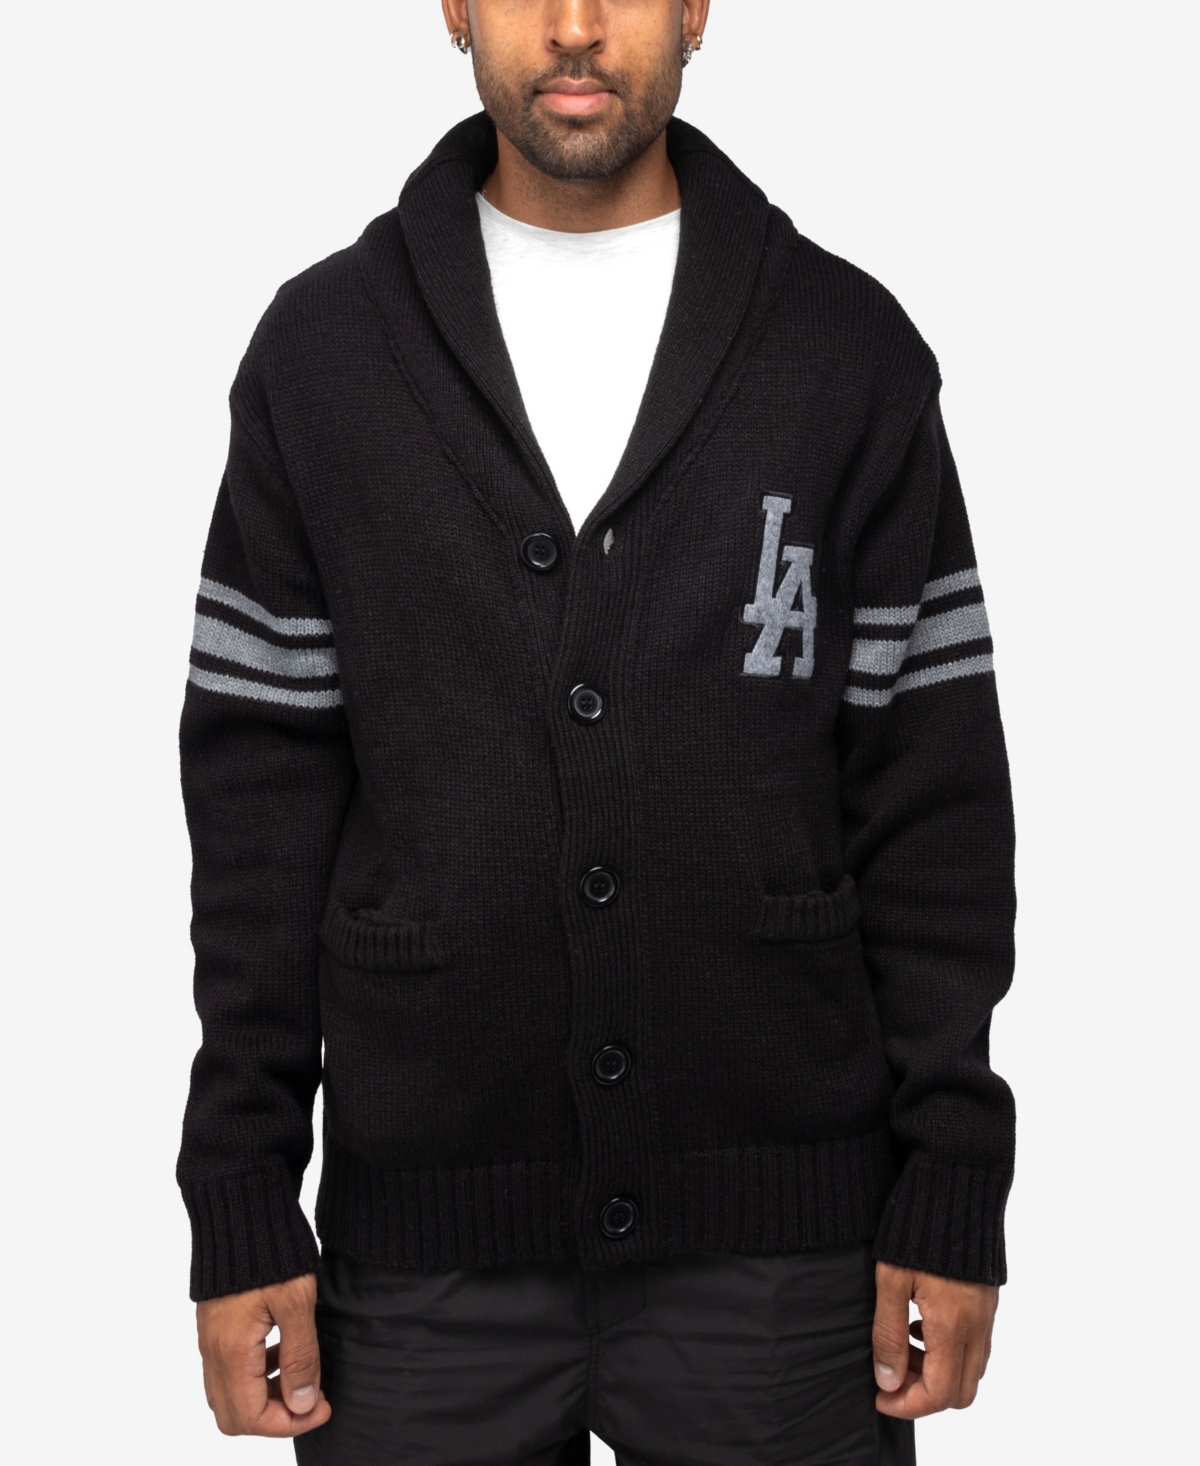 X-ray Men's Shawl Collar Heavy Gauge Cardigan With City Patch In Black